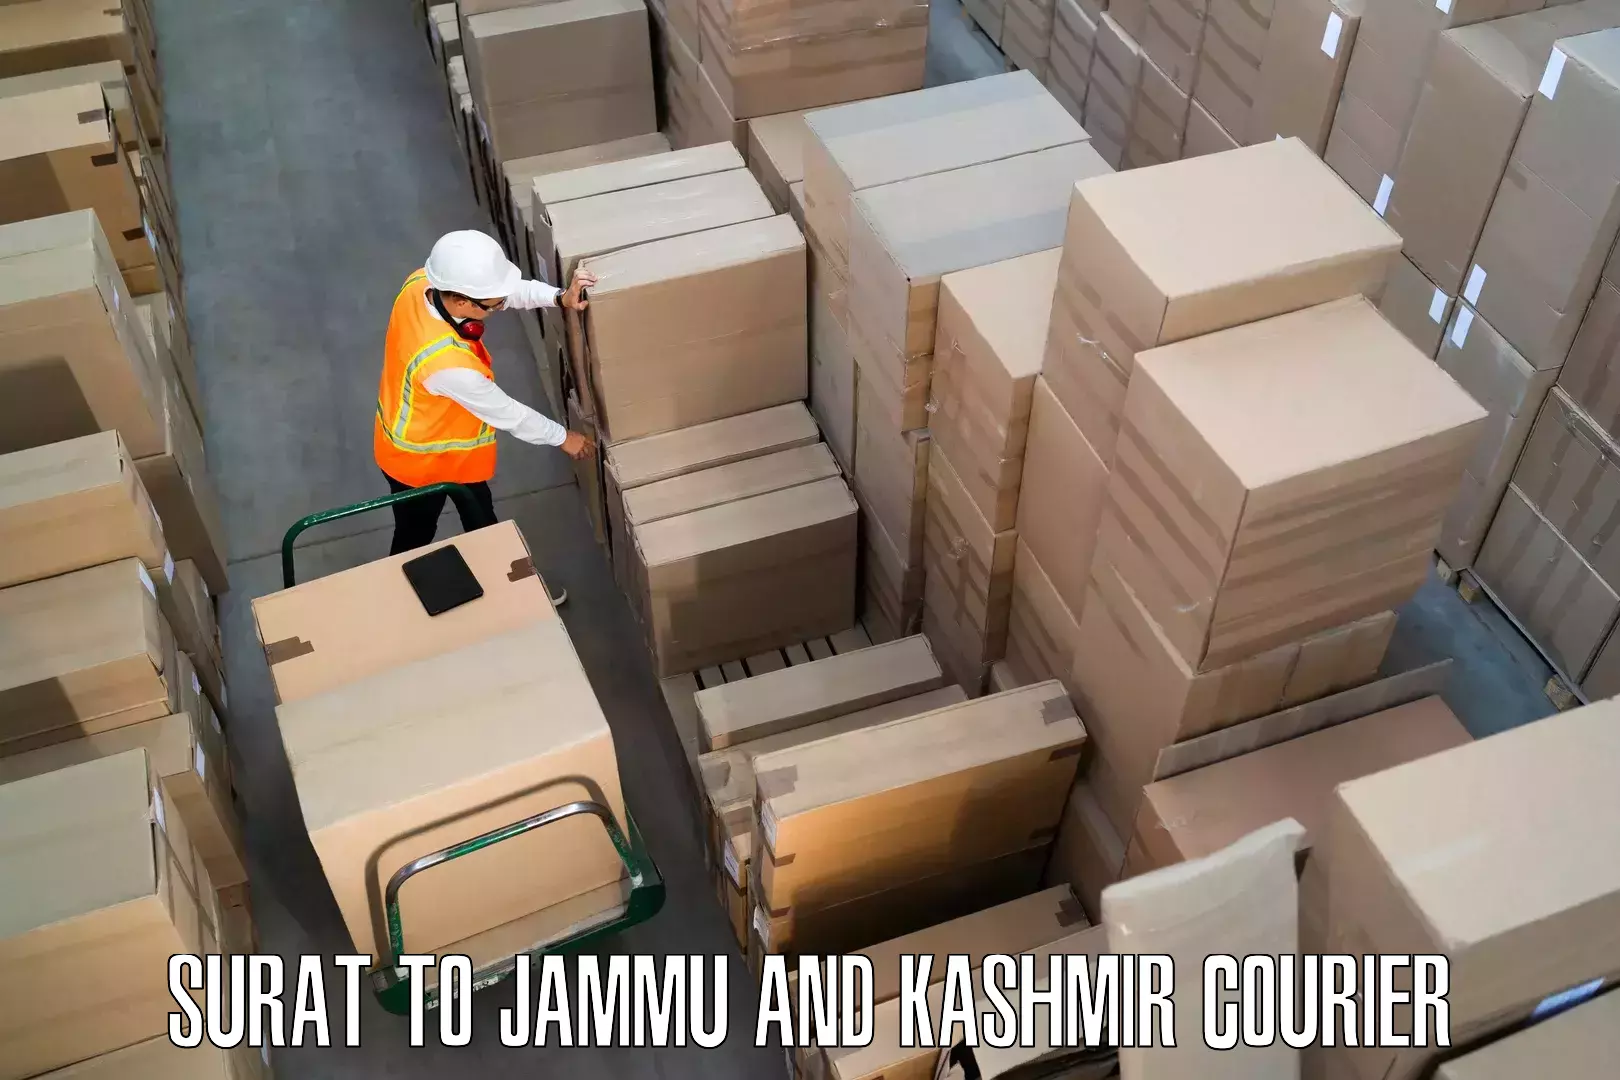 Trusted relocation experts Surat to Baramulla